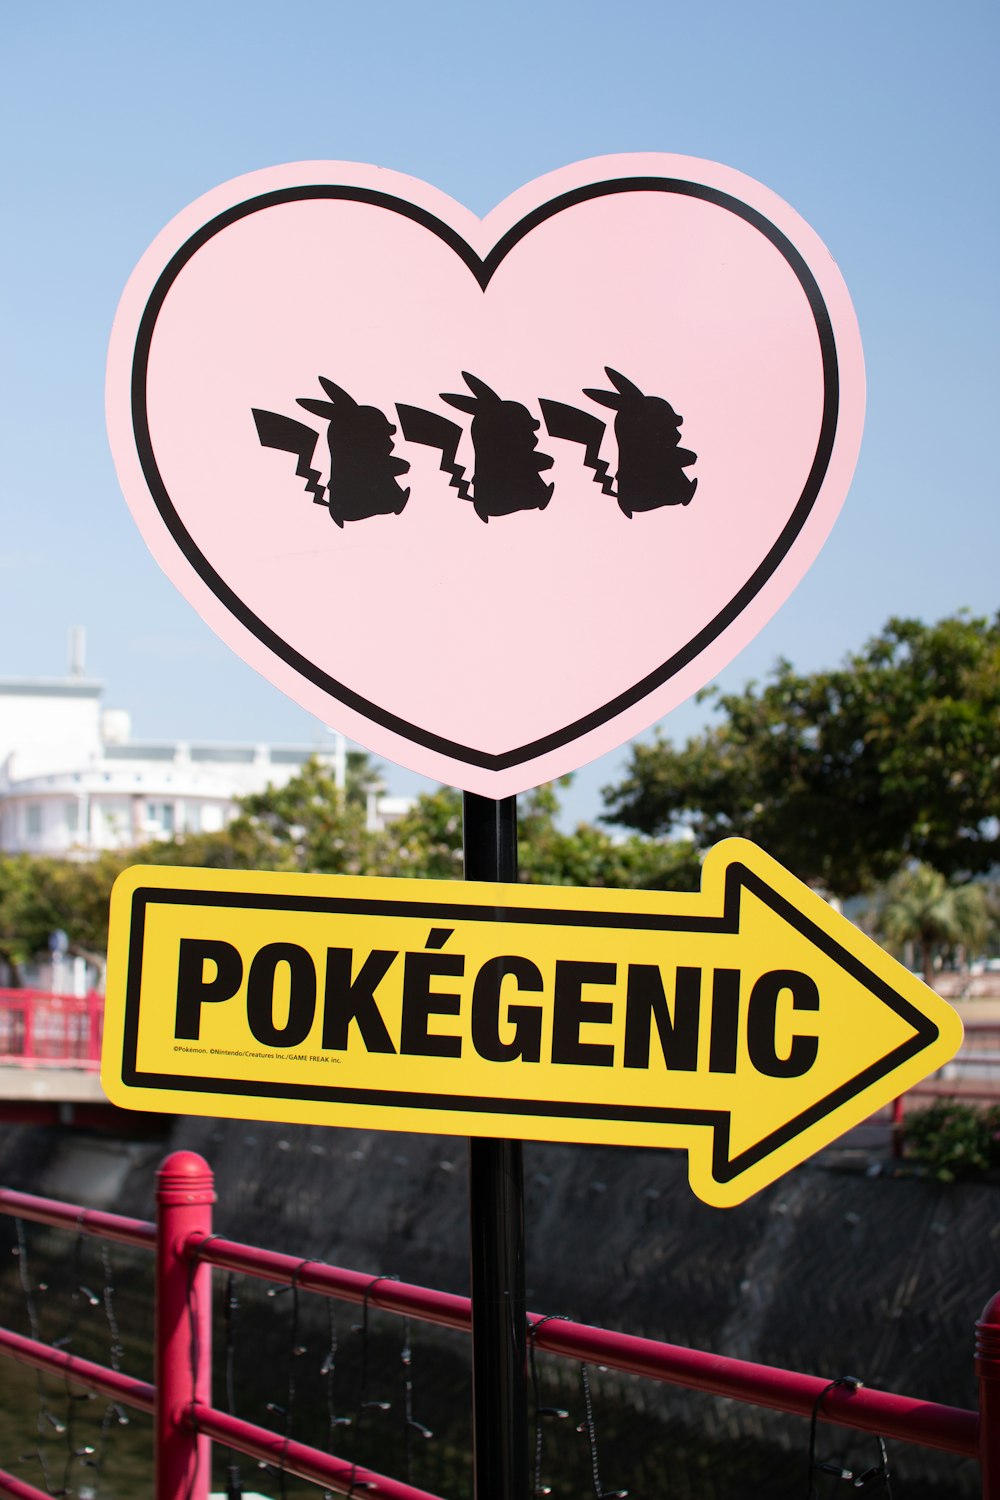 a pink heart shaped sign with a yellow arrow pointing to the right